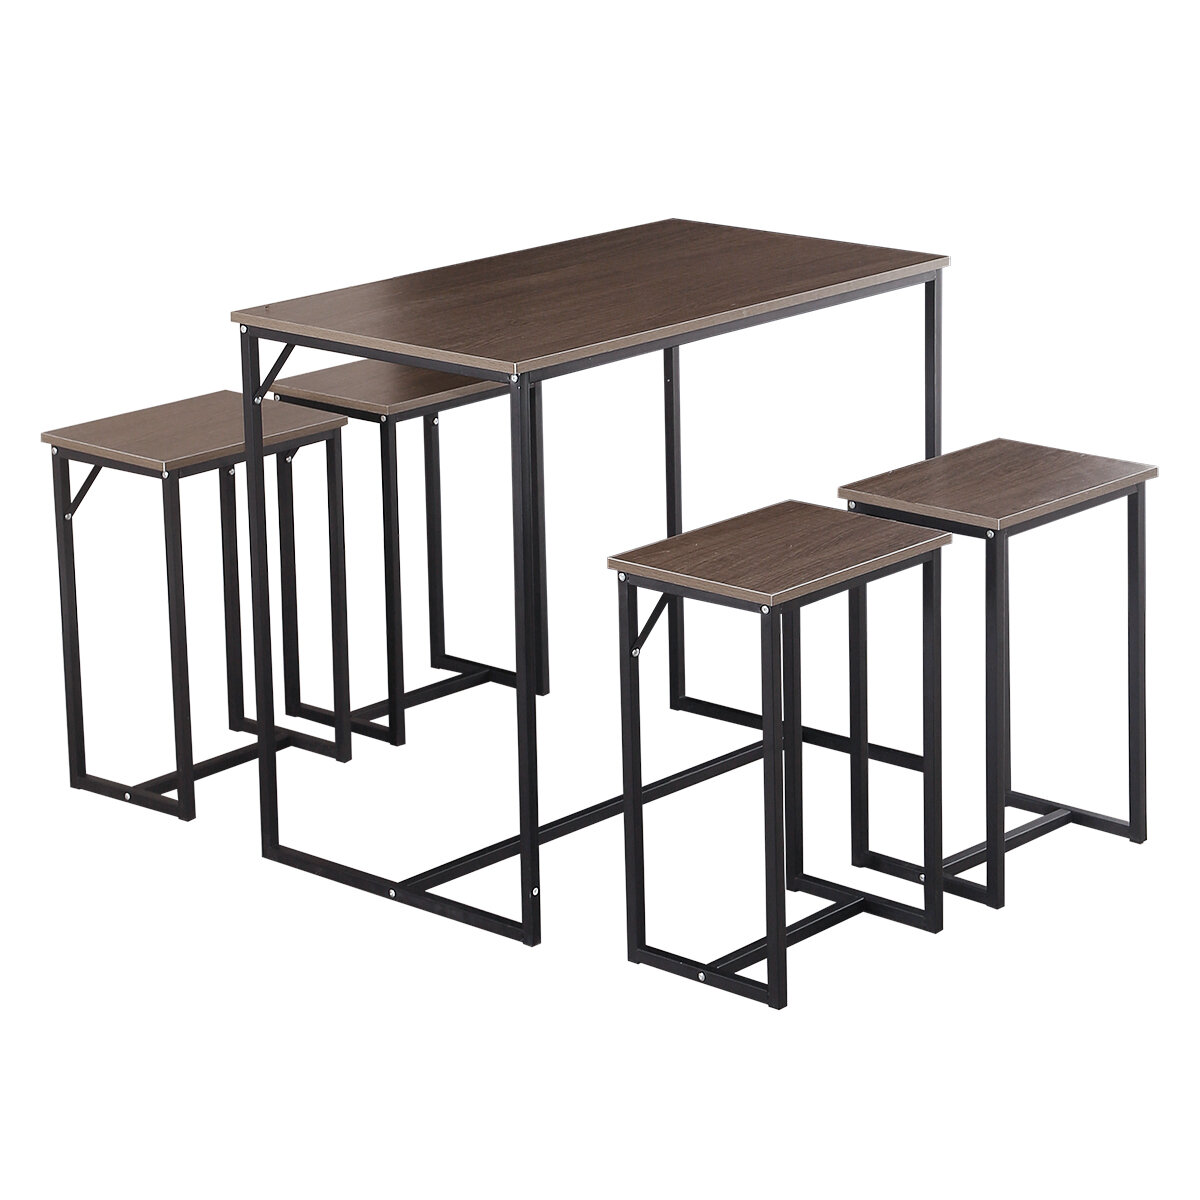 5 Piece Dining Table Set Counter Height Pub Table and 4 Stools Set for Small Space in The Dining Room or Kitchen